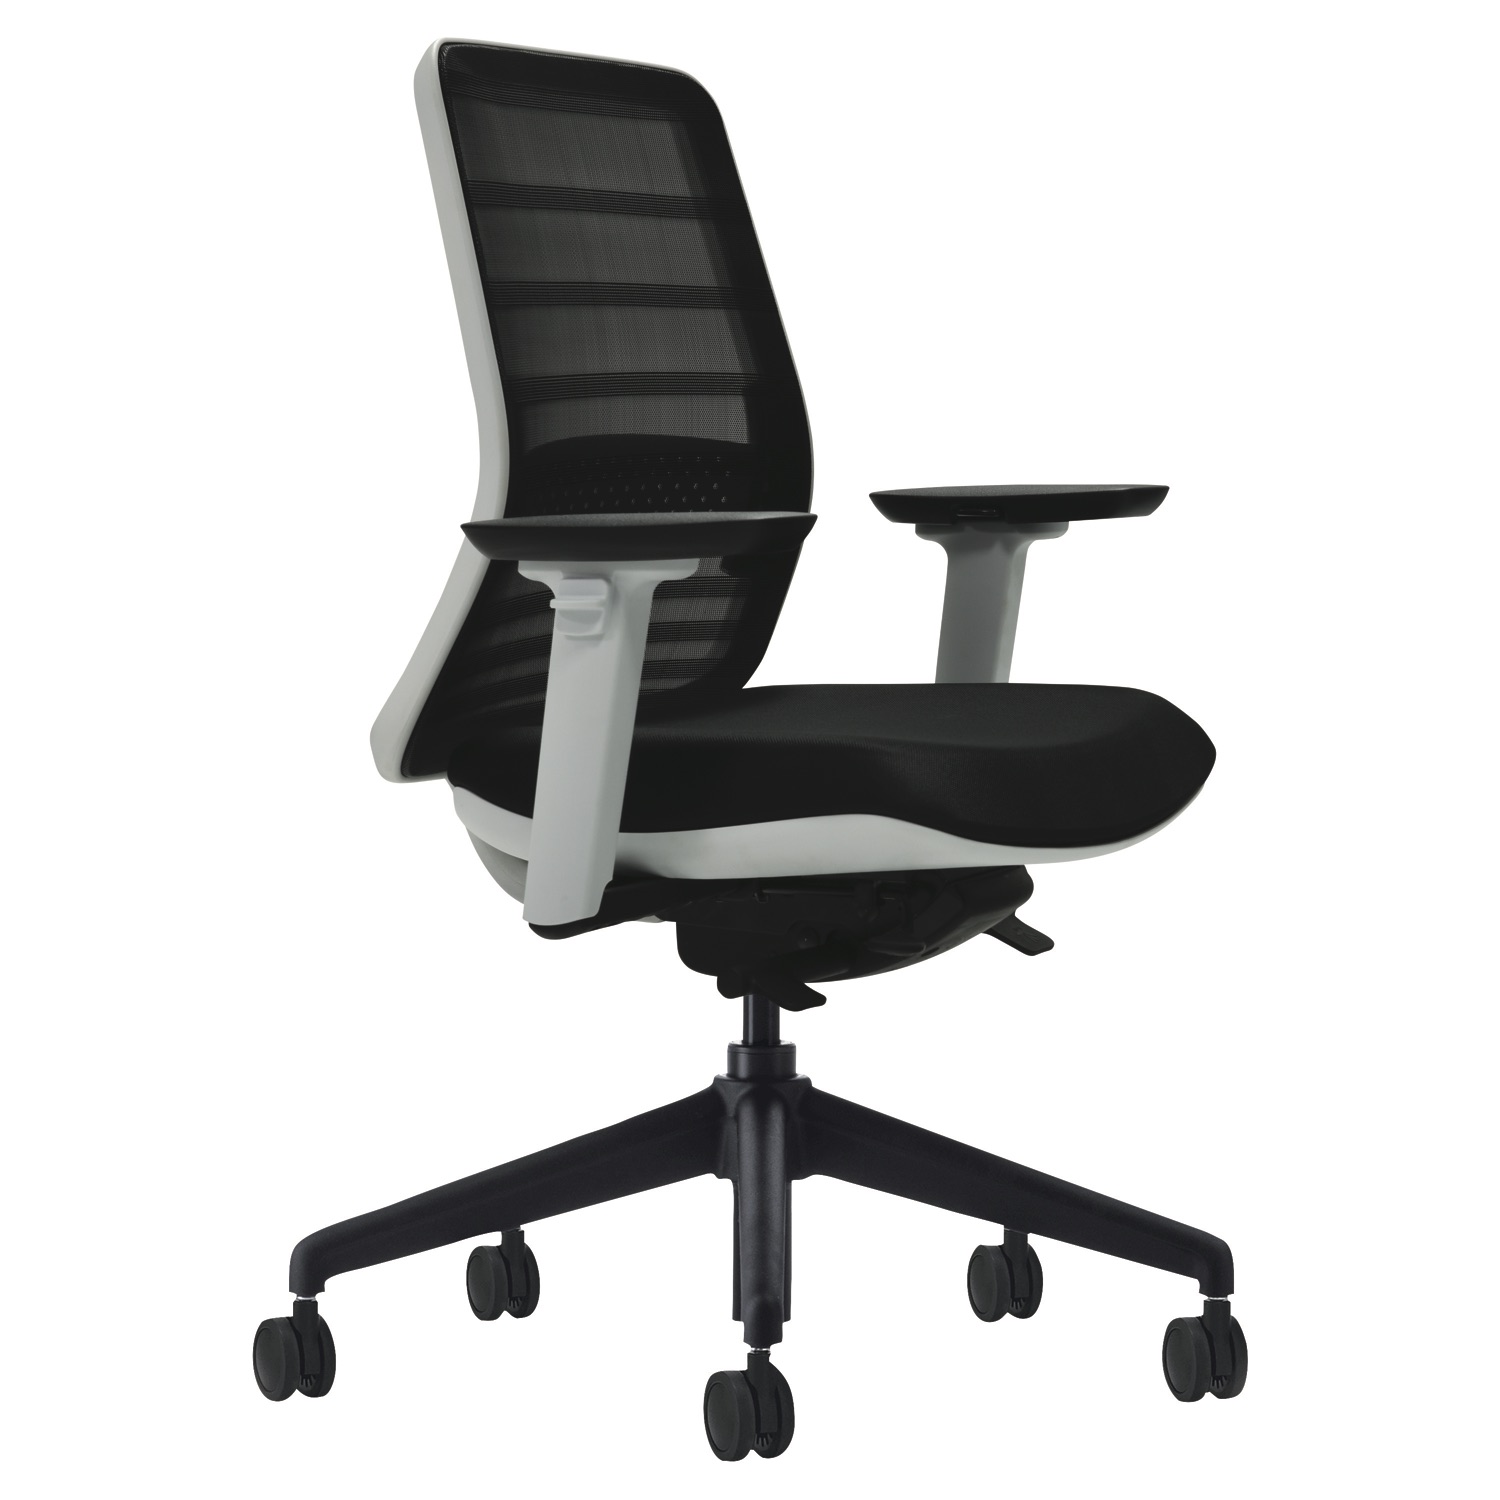 Tonique Home Working Chair light grey frame